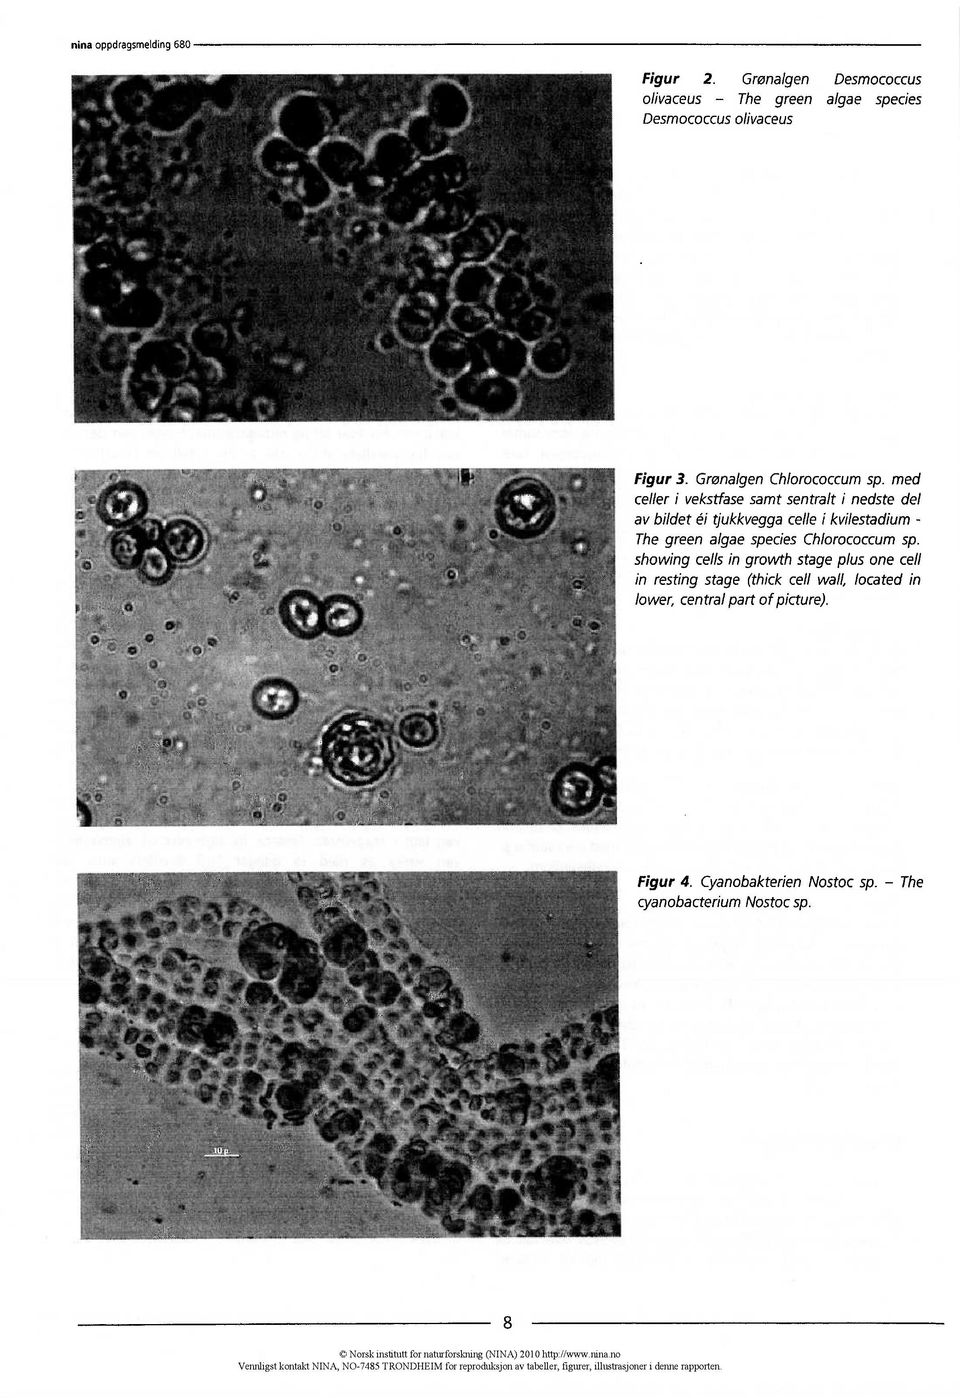 showing cells in growth stage plus one cell in resting stage (thick cell wall, located in lower, central part of picture). Figur 4. Cyanobakterien Nostoc sp.